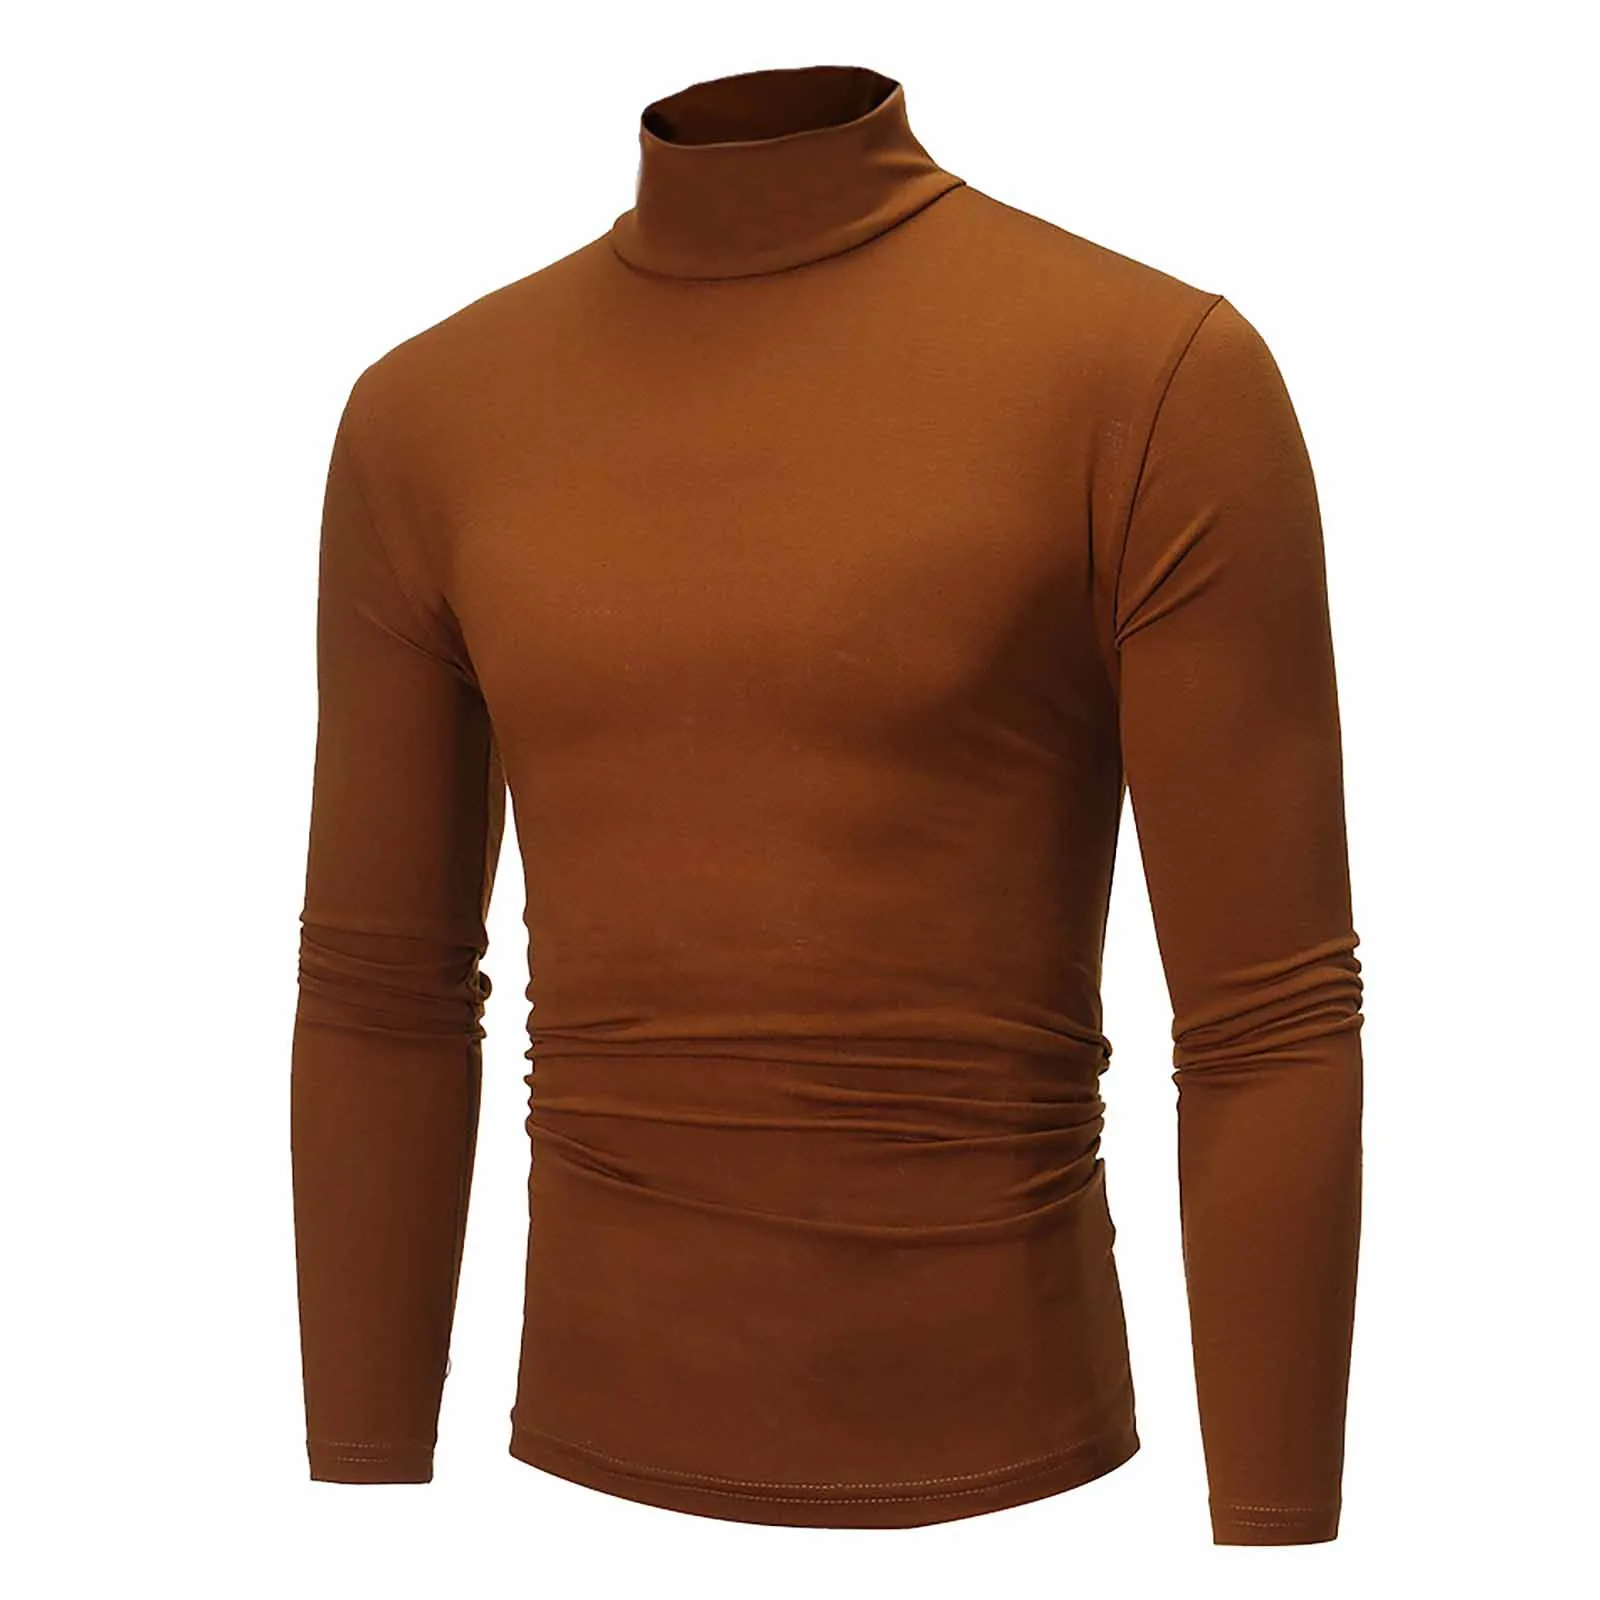 formal sweater for men Fashion Men's Casual Slim Fit Basic Turtleneck Knitted Sweater High Collar Pullover Male Double Collar Autumn Winter Tops brown sweater men